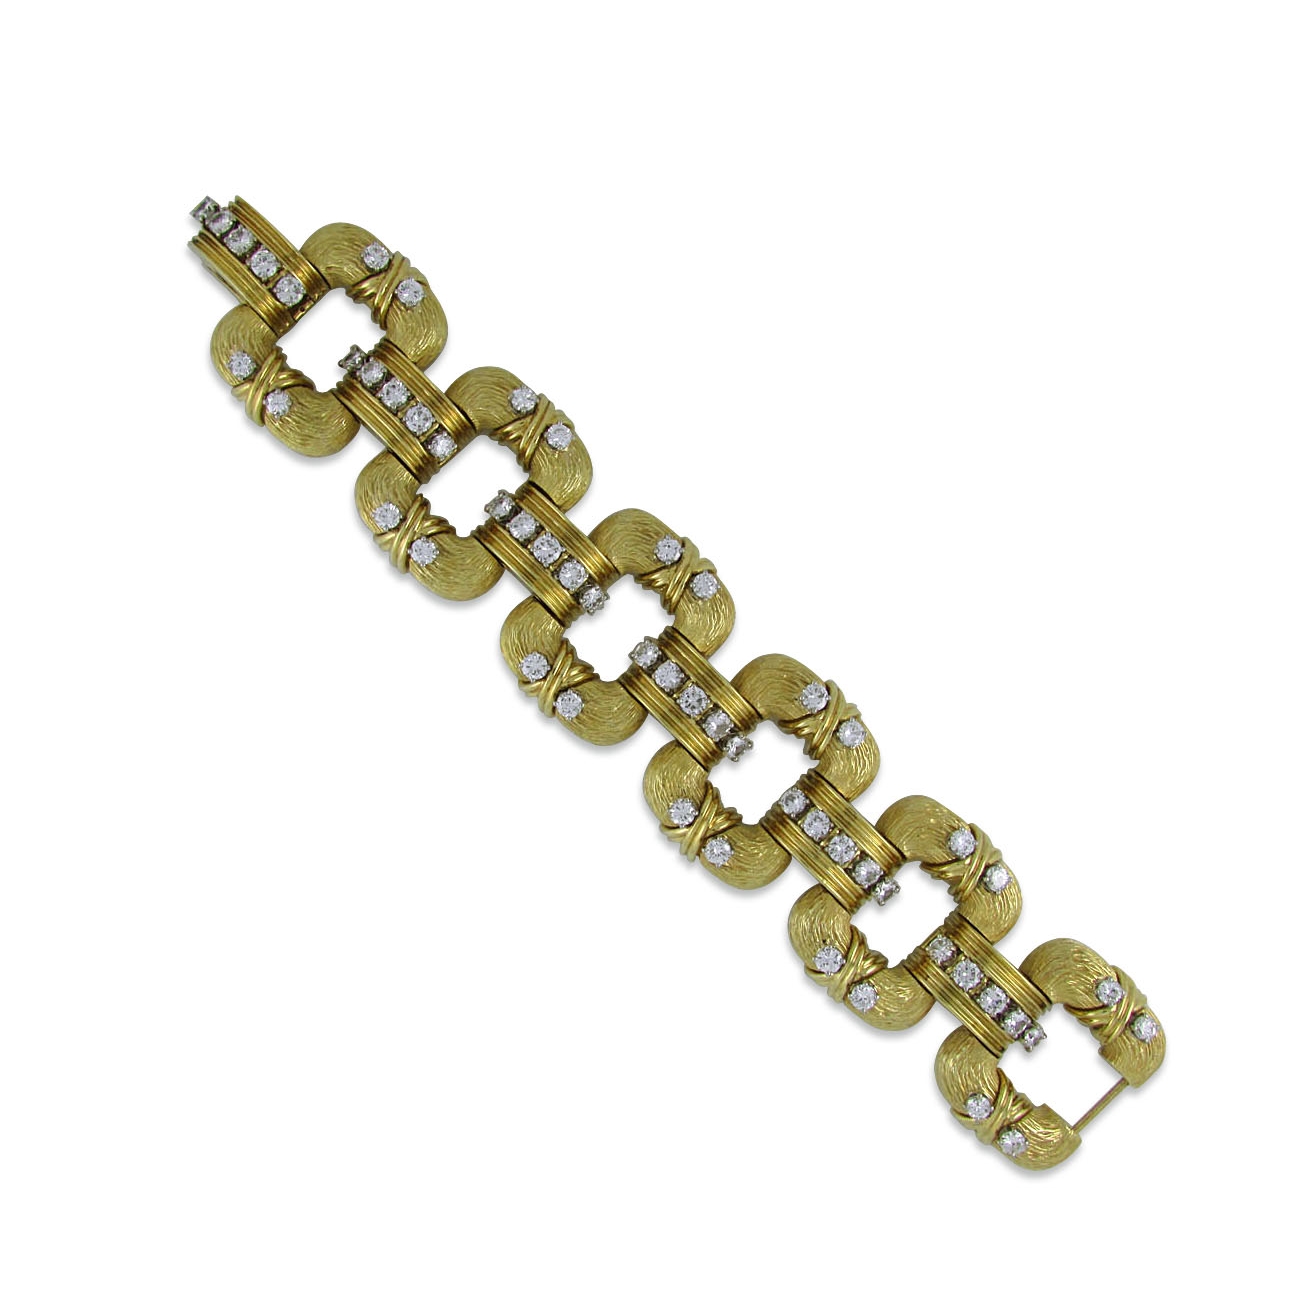  18KT textured yellow gold bracelet with six domed and textured rectangular links each prong-set with four round diamonds; connected with ribbed polished yellow gold links prong-set with five round diamonds.&nbsp; The total weight of the 54 diamonds 